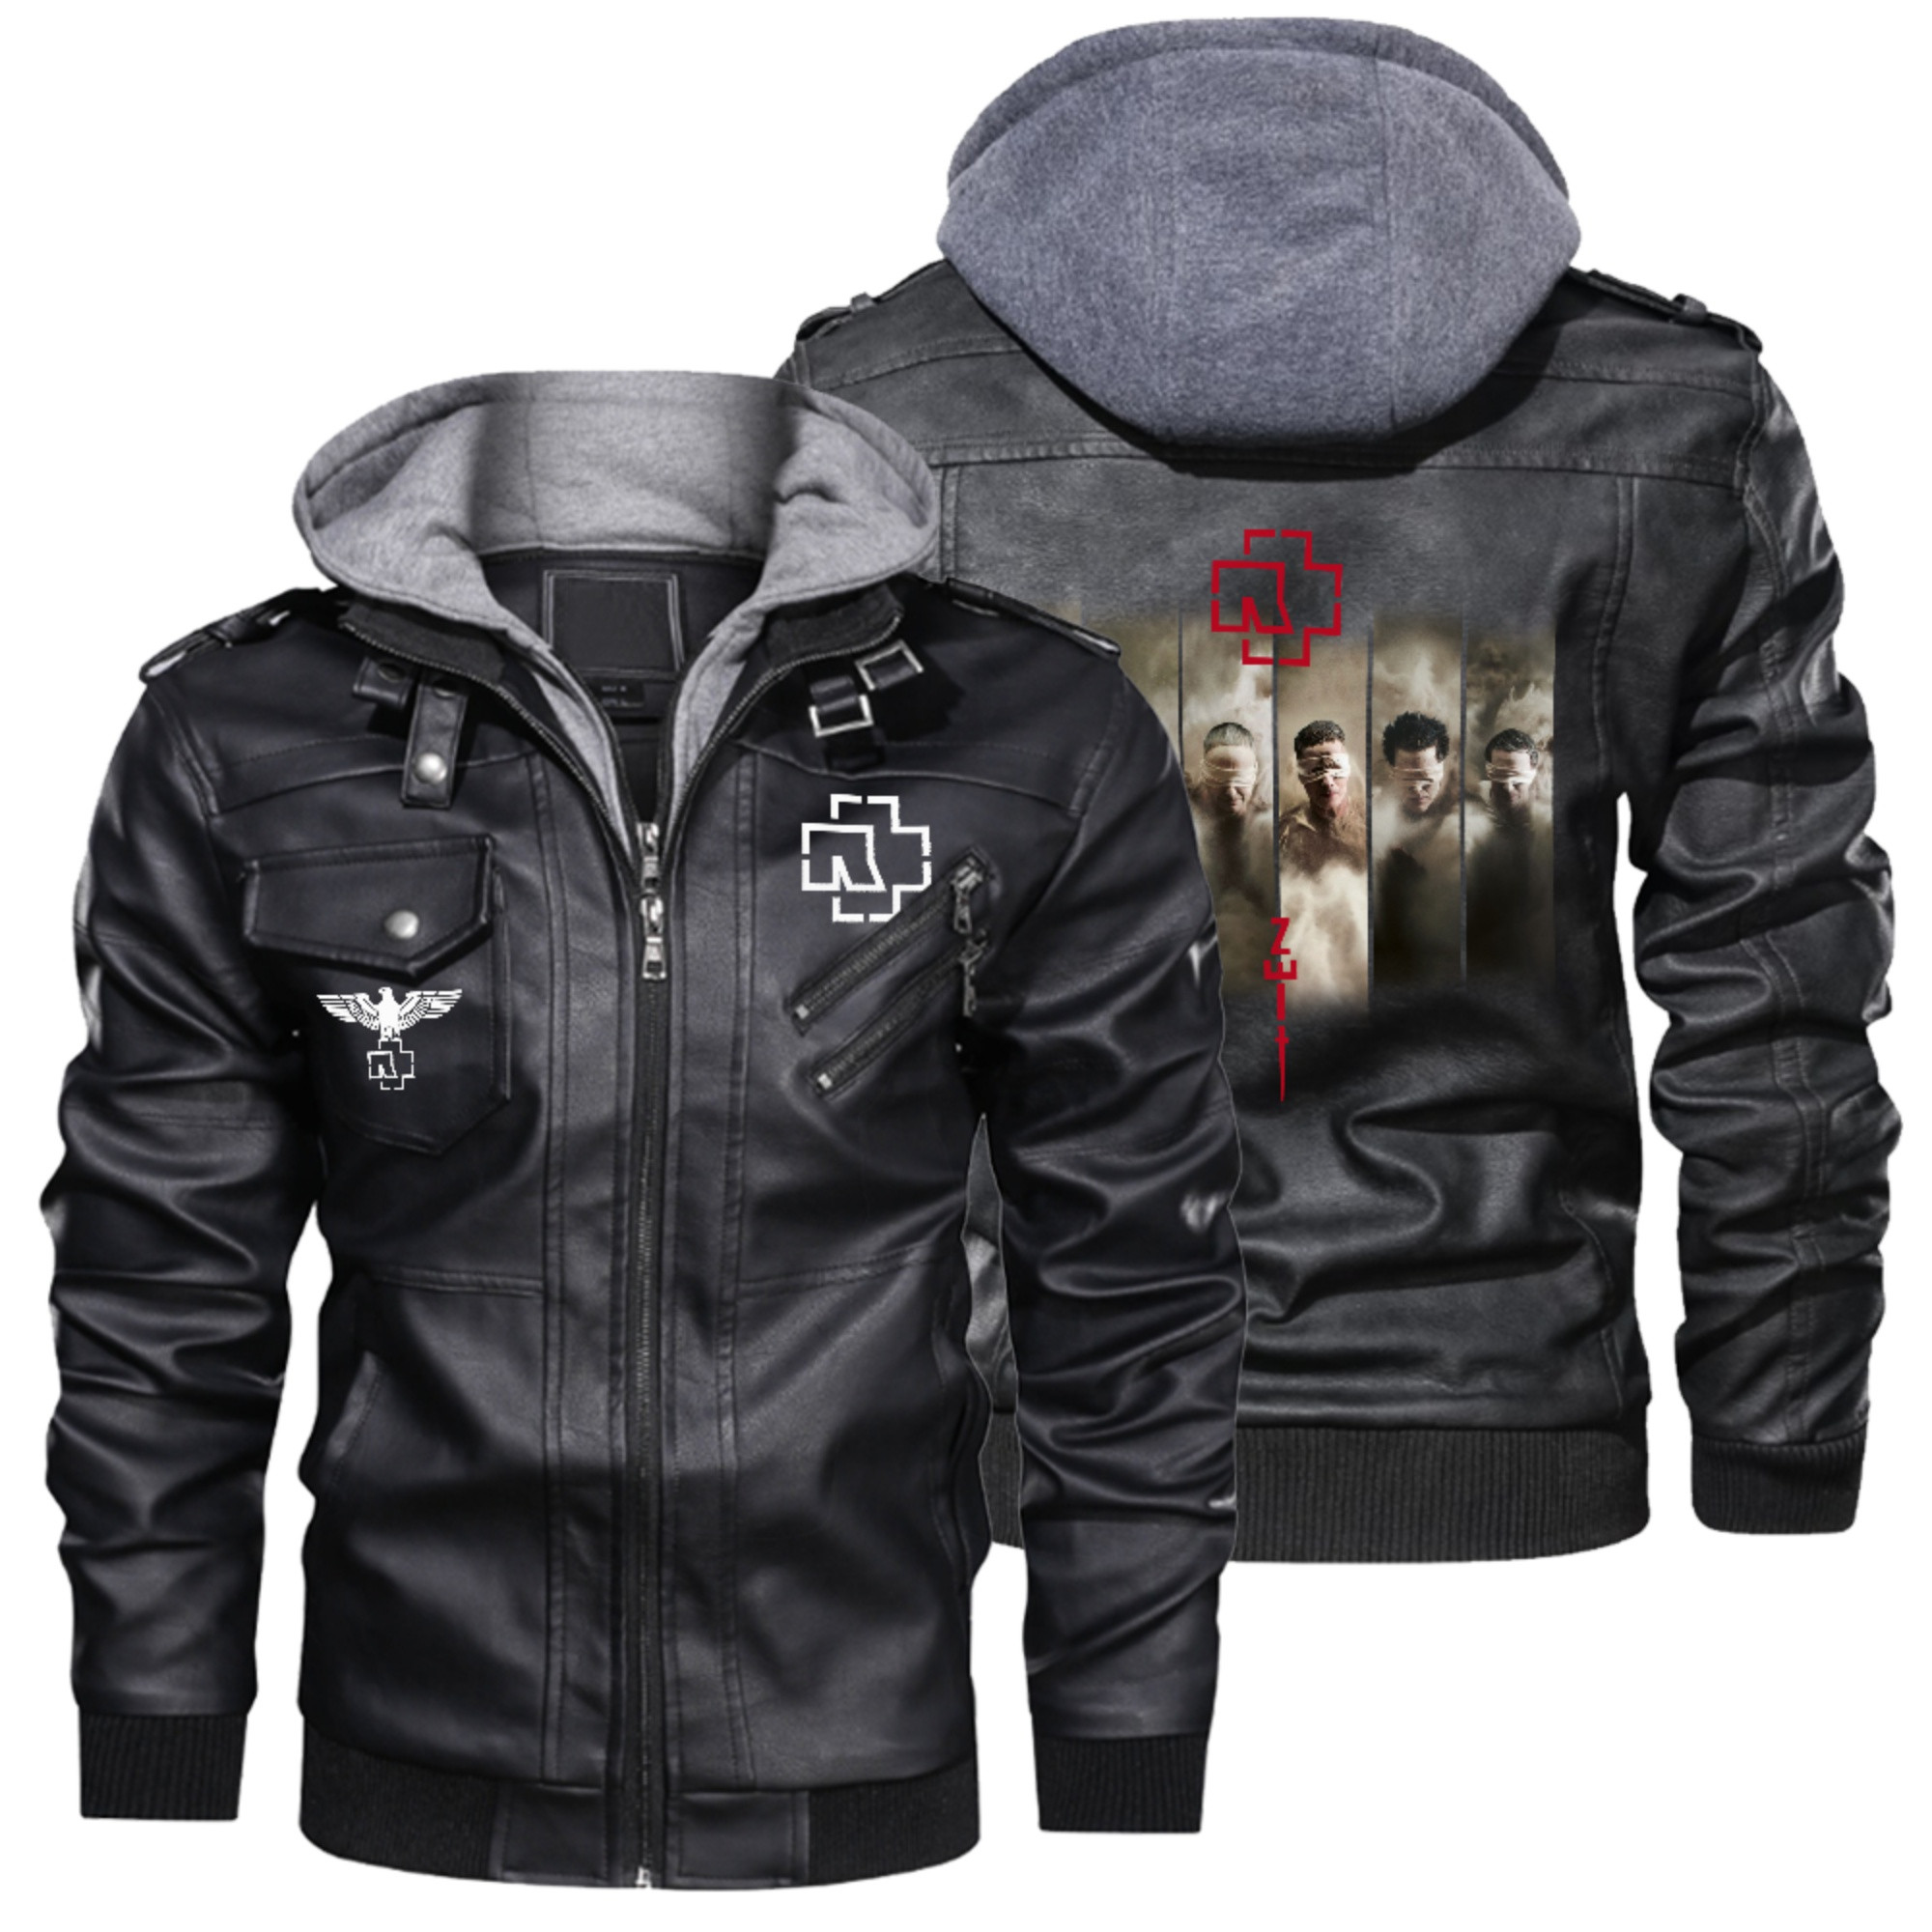 Limited Edition Leather Jacket with Hood RMM 5 - Tabotee